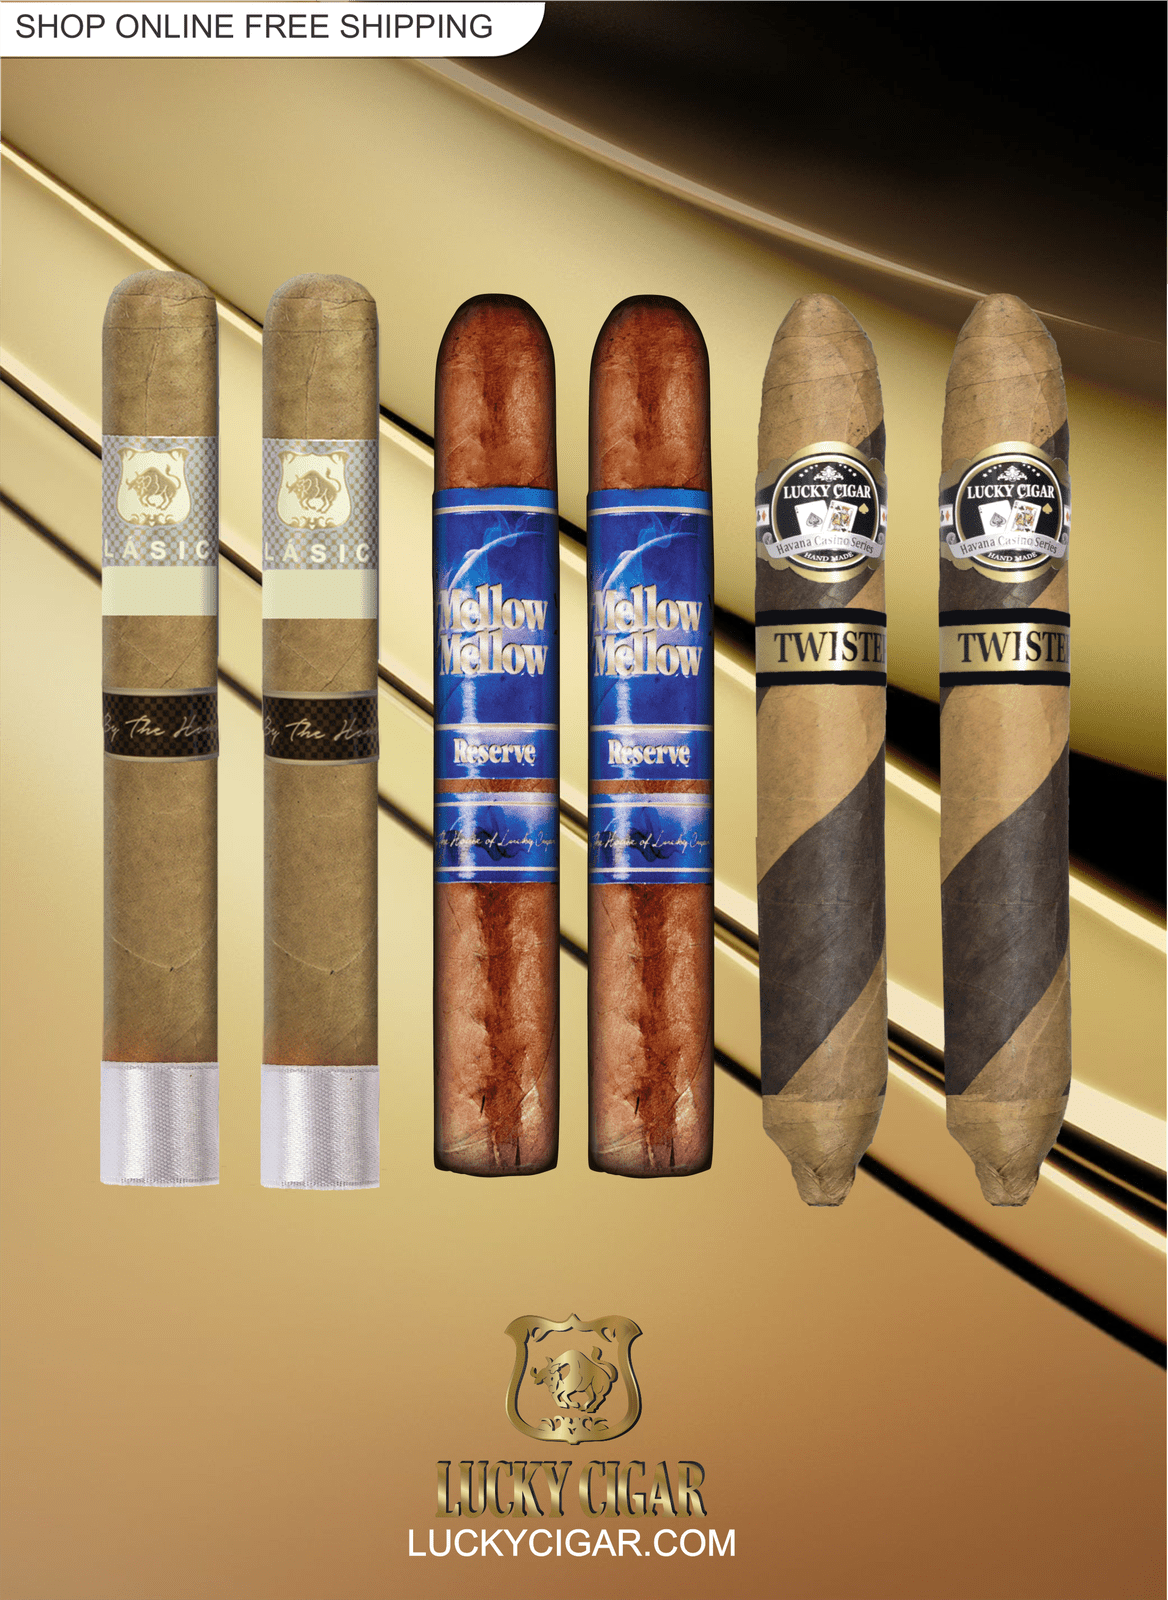 Lucky Cigar Sampler Sets: Set of 6 Cigars with Classico, Mellow Mellow Reserve, Twister